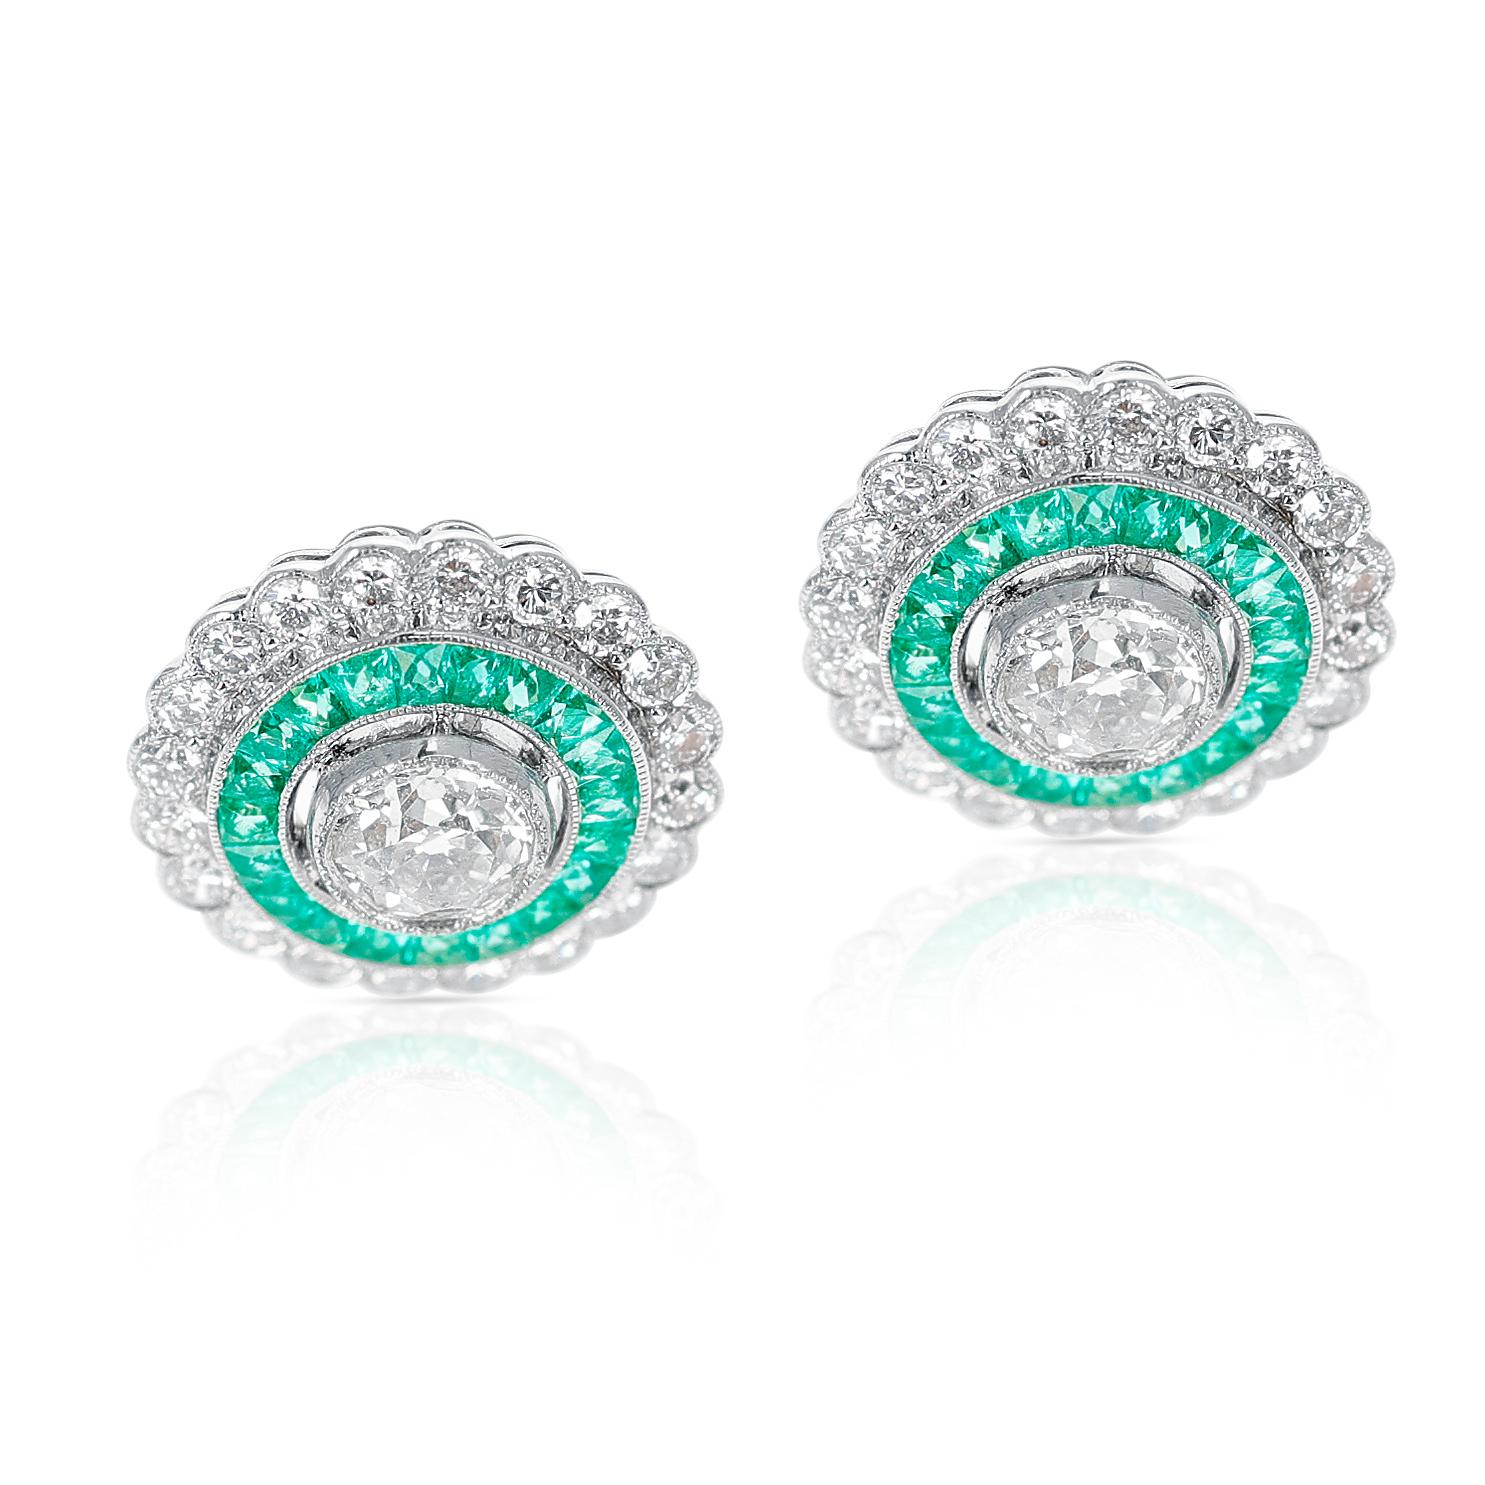 Round Cut Art Deco Style 0.70 Ct. Each Diamond and Channel Set Emerald Earrings, Platinum For Sale